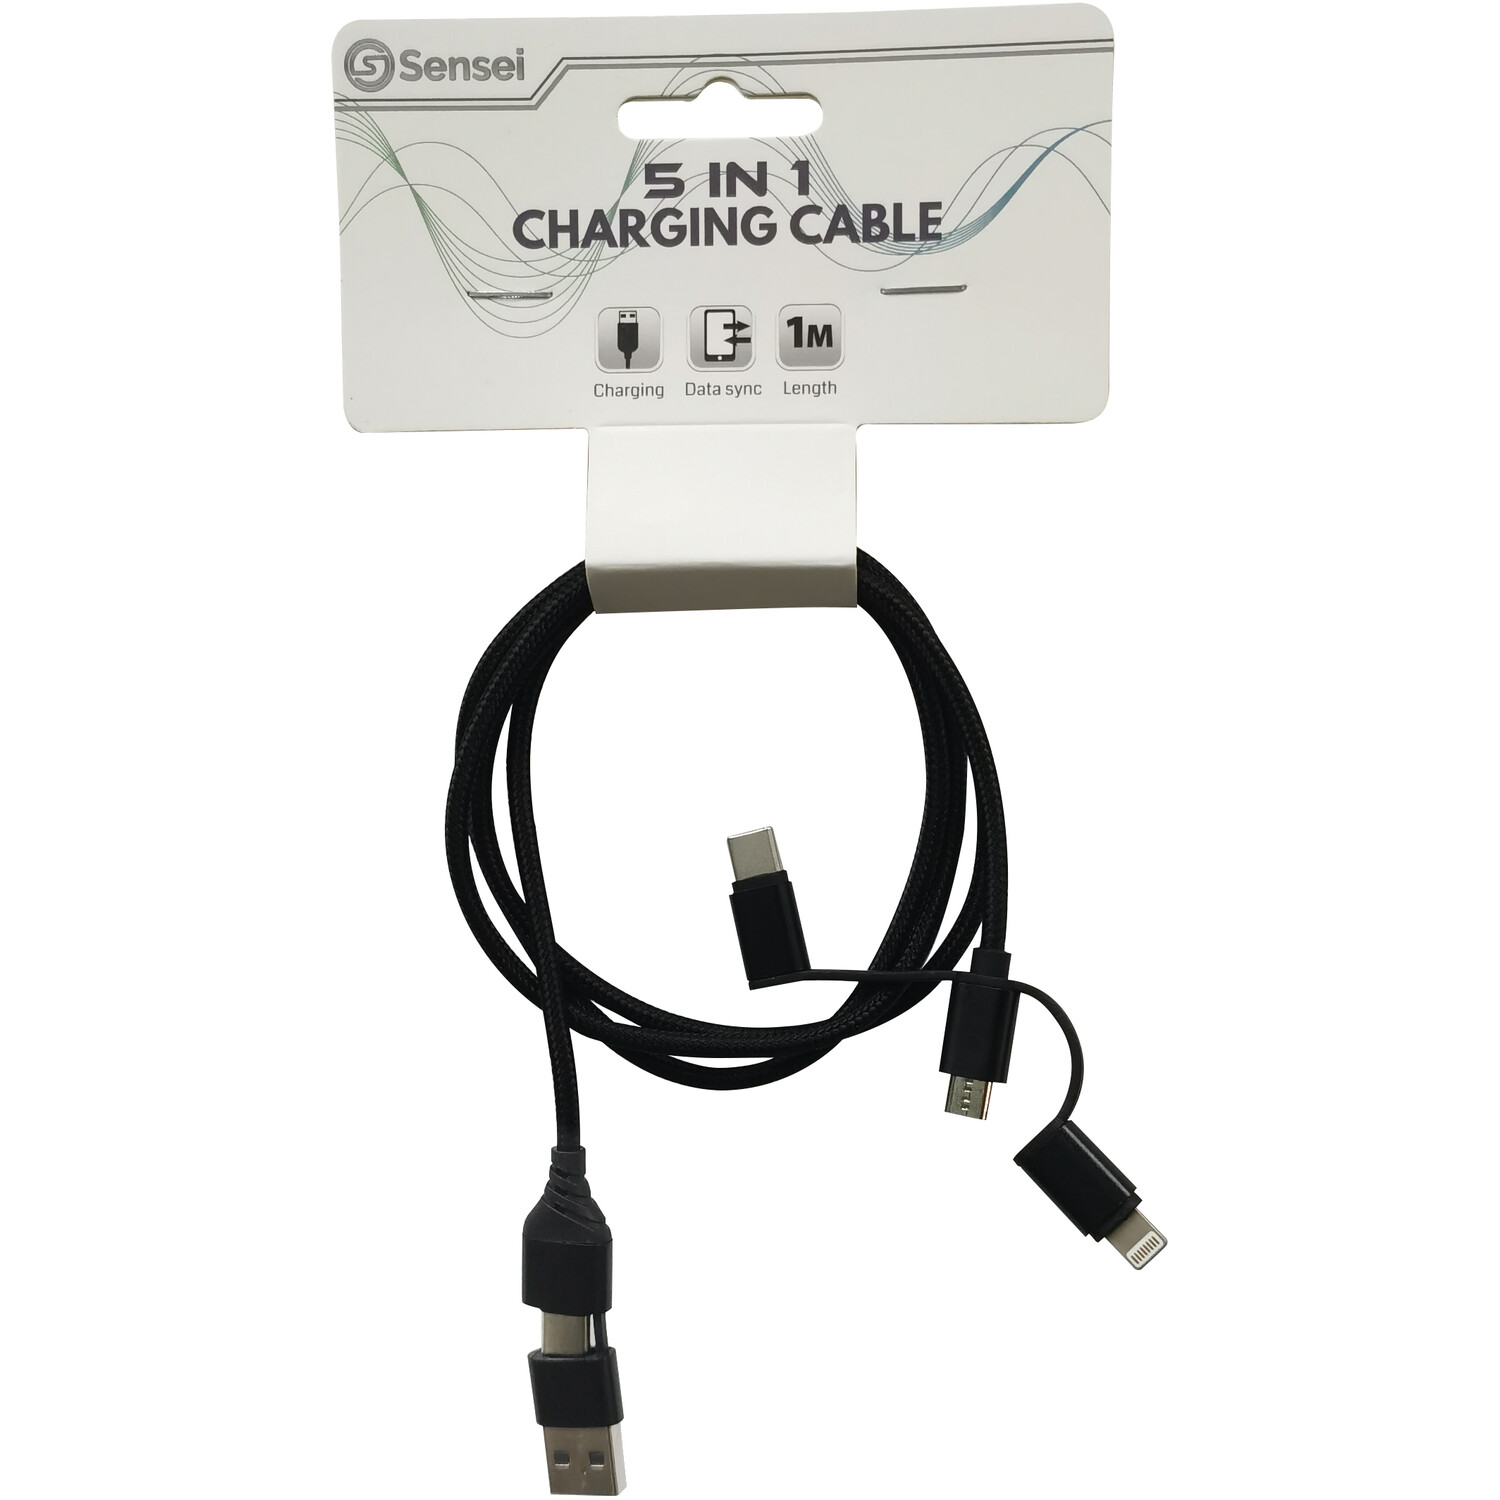 5-in-1 Charging Cable Image